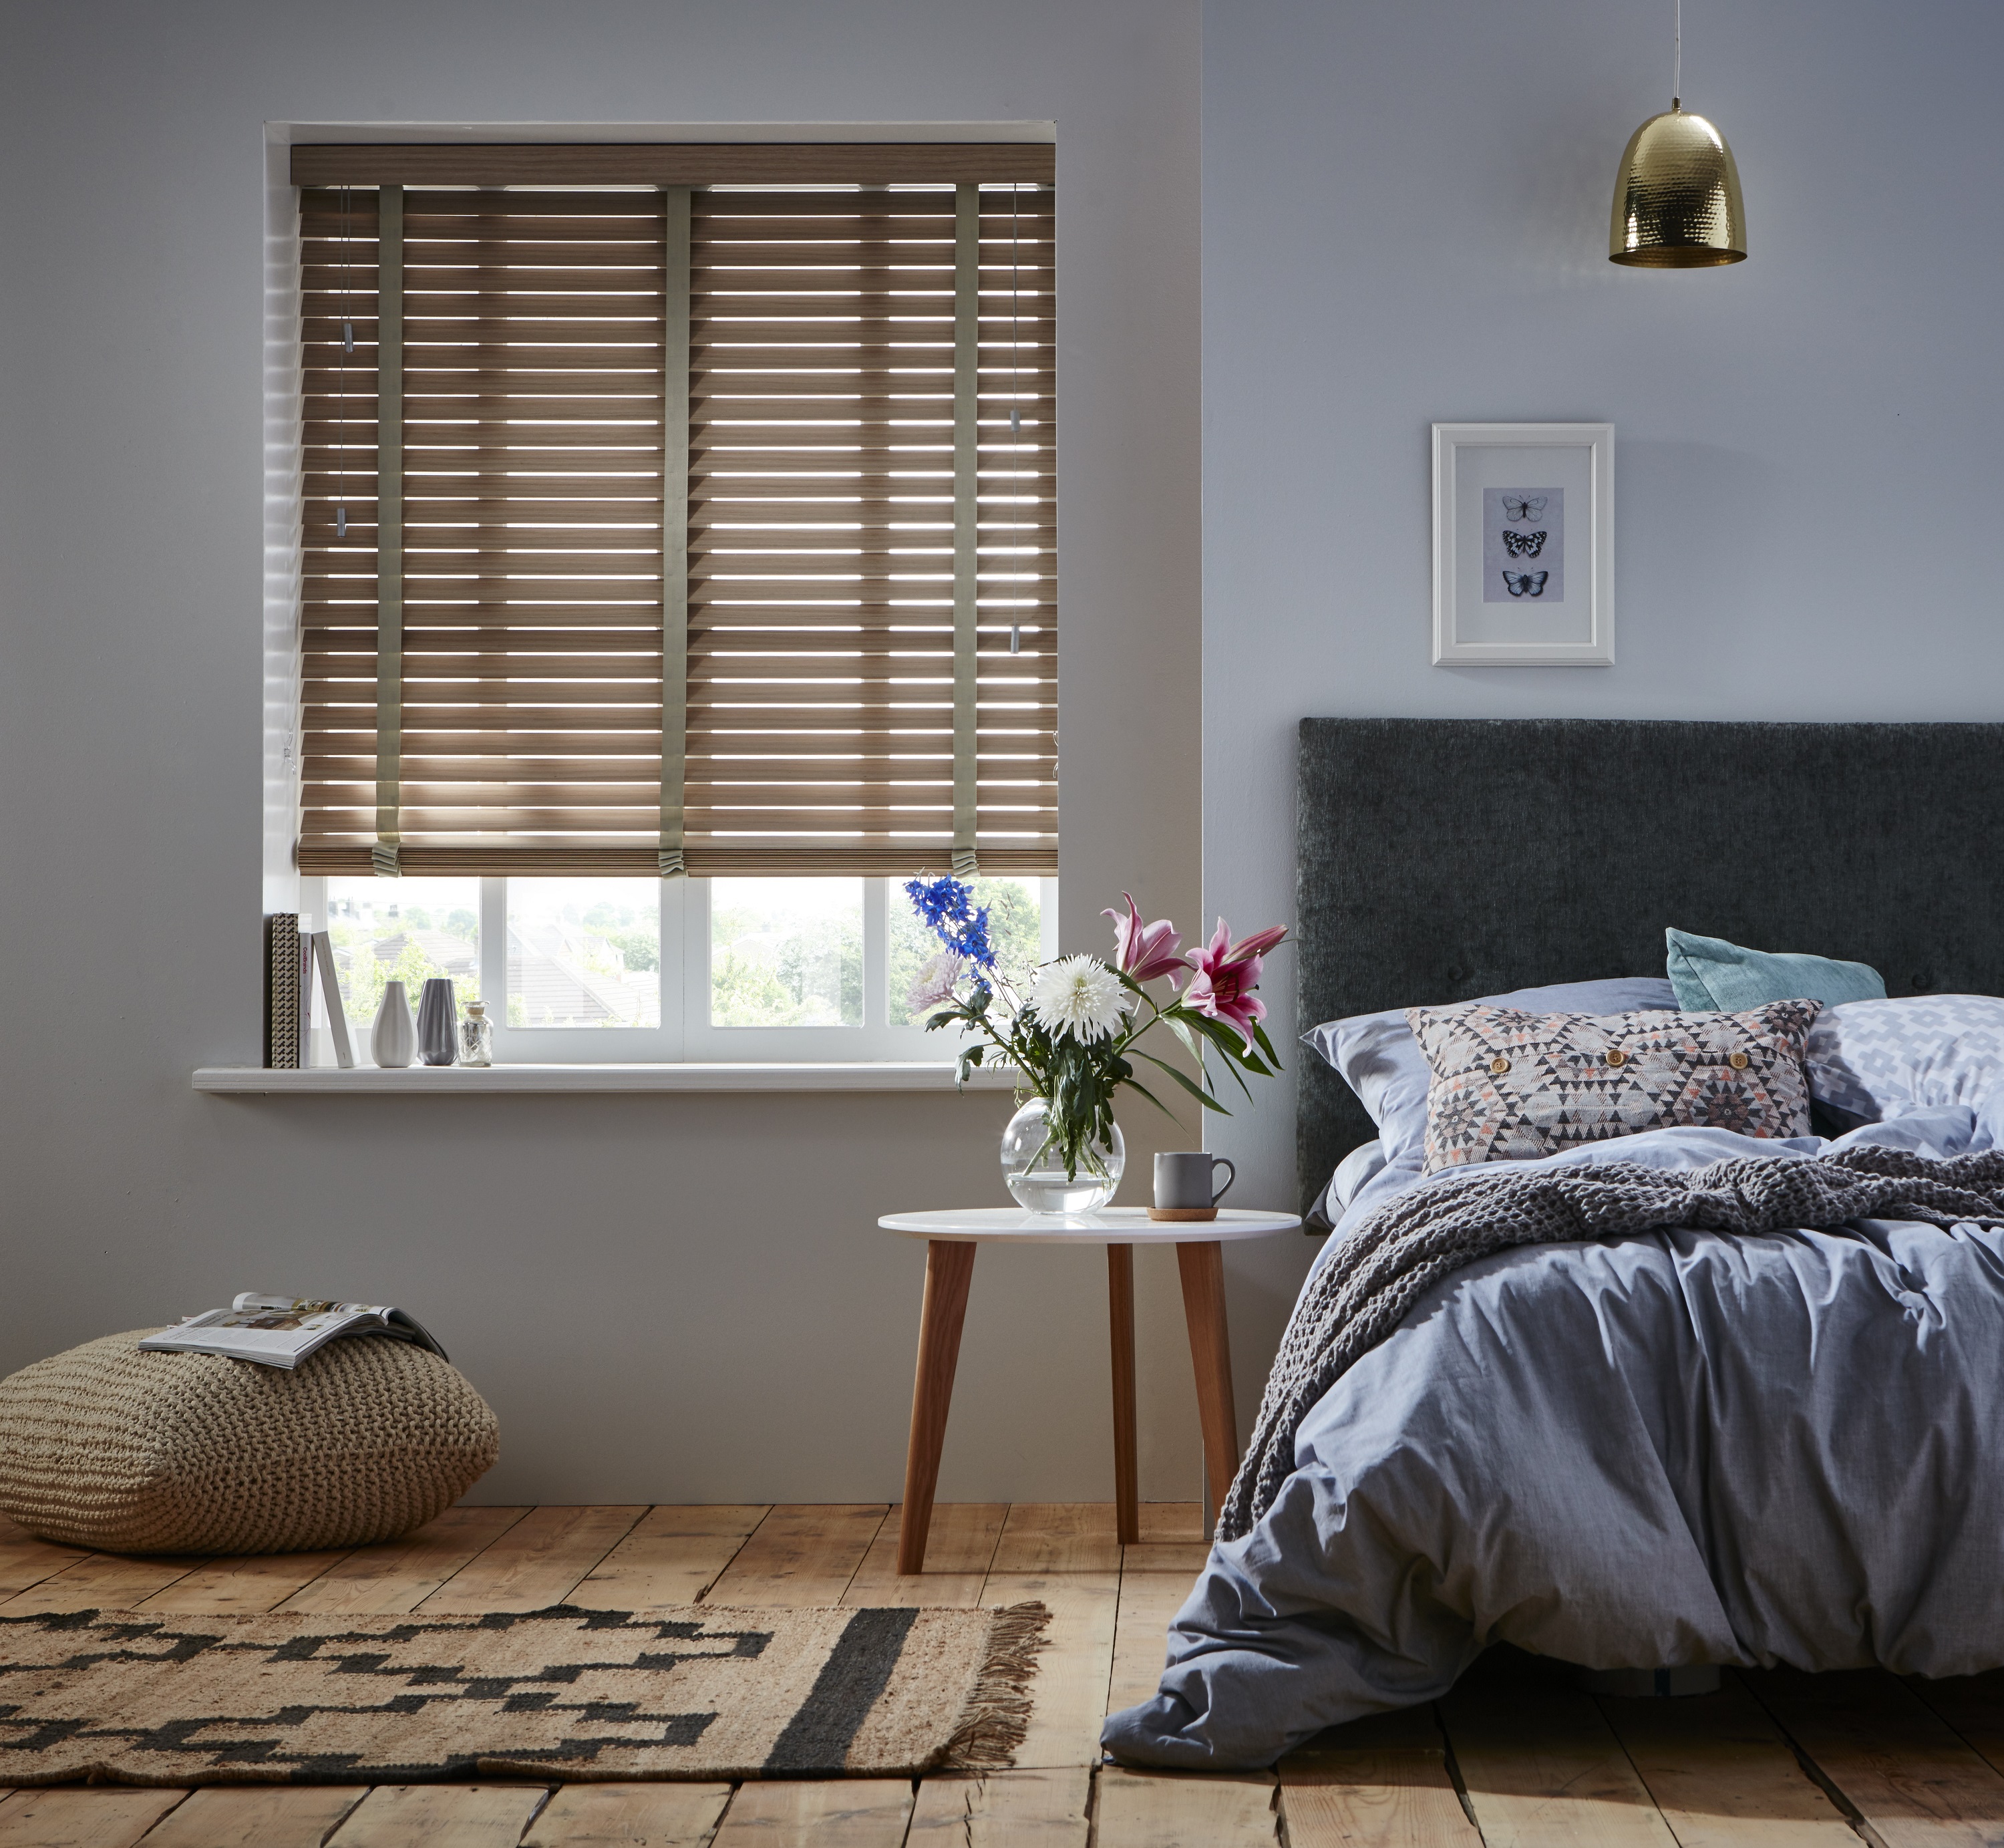 Bespoke Wood Venetian blind in Caroba, from £118 for W61cm x L61cm, including fitting, Apollo Blinds.